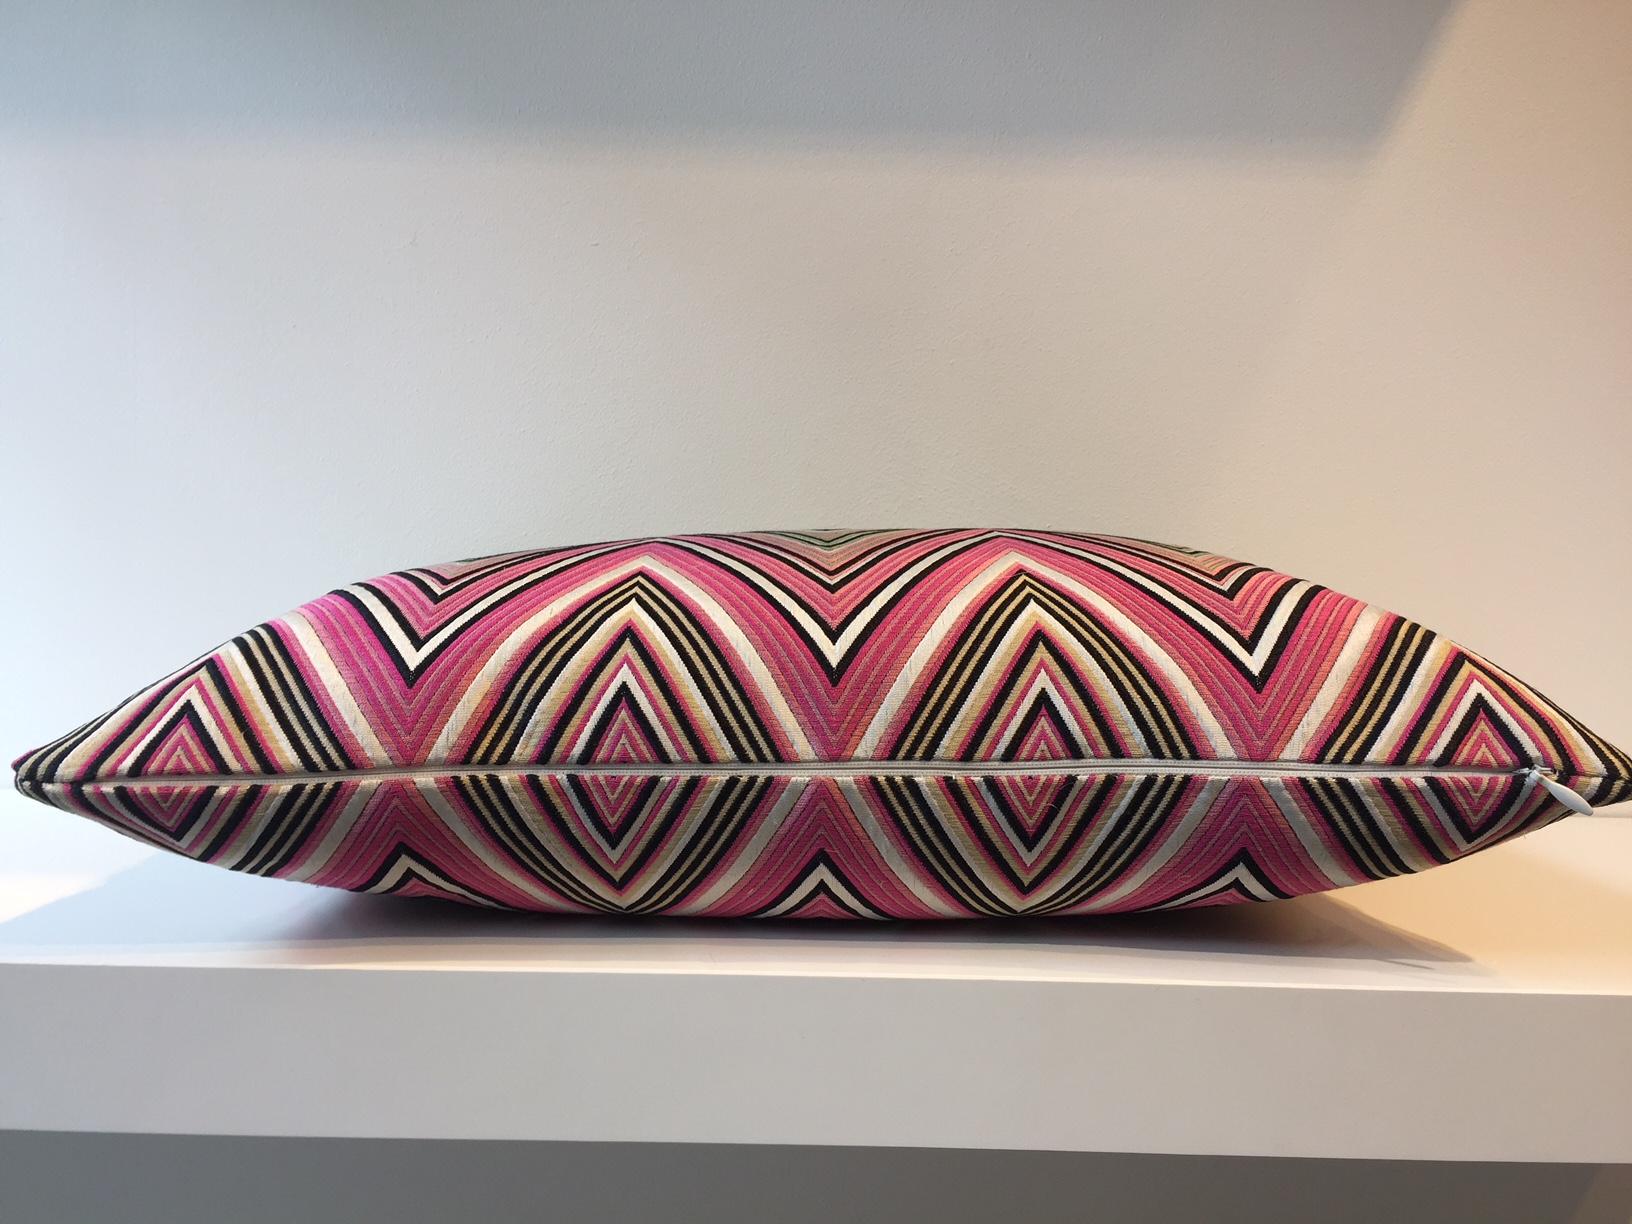 One set of cushions, 3 no cushions, size 30 x 45cm,
original fabric from Missoni ART: Kew color T50  (fabric got discontinued from the actual Missoni collection) the cushions are for outdoor use suitable,
multicolored chevron stripe jacquard fabric